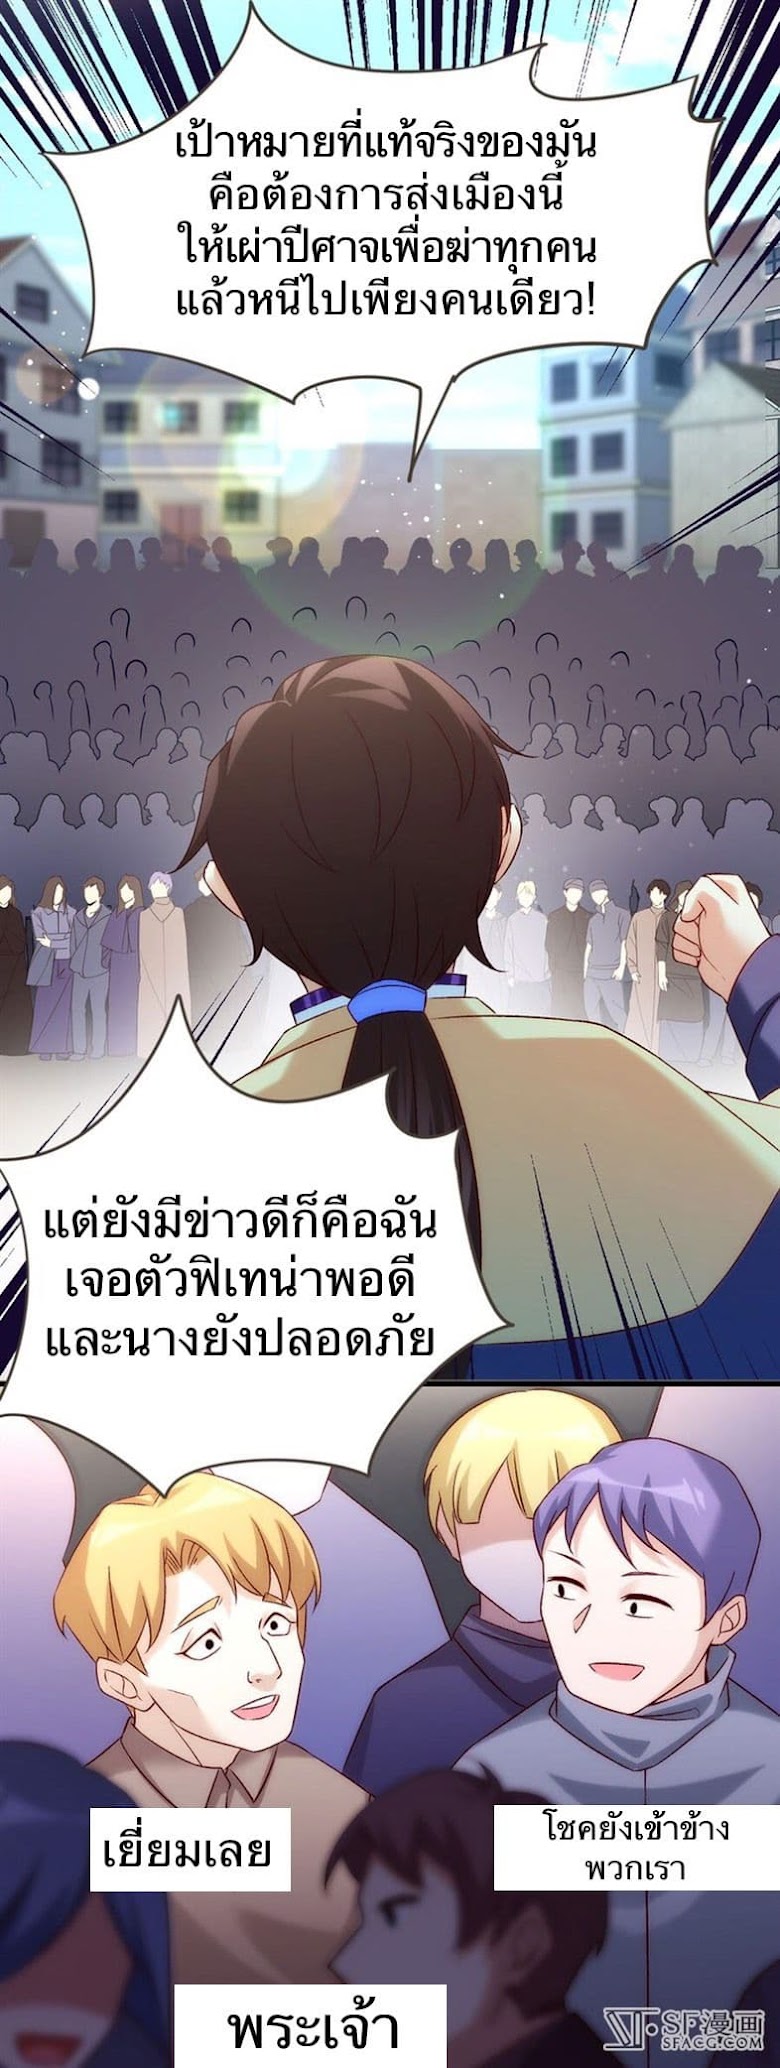 Nobleman and so what? - หน้า 56